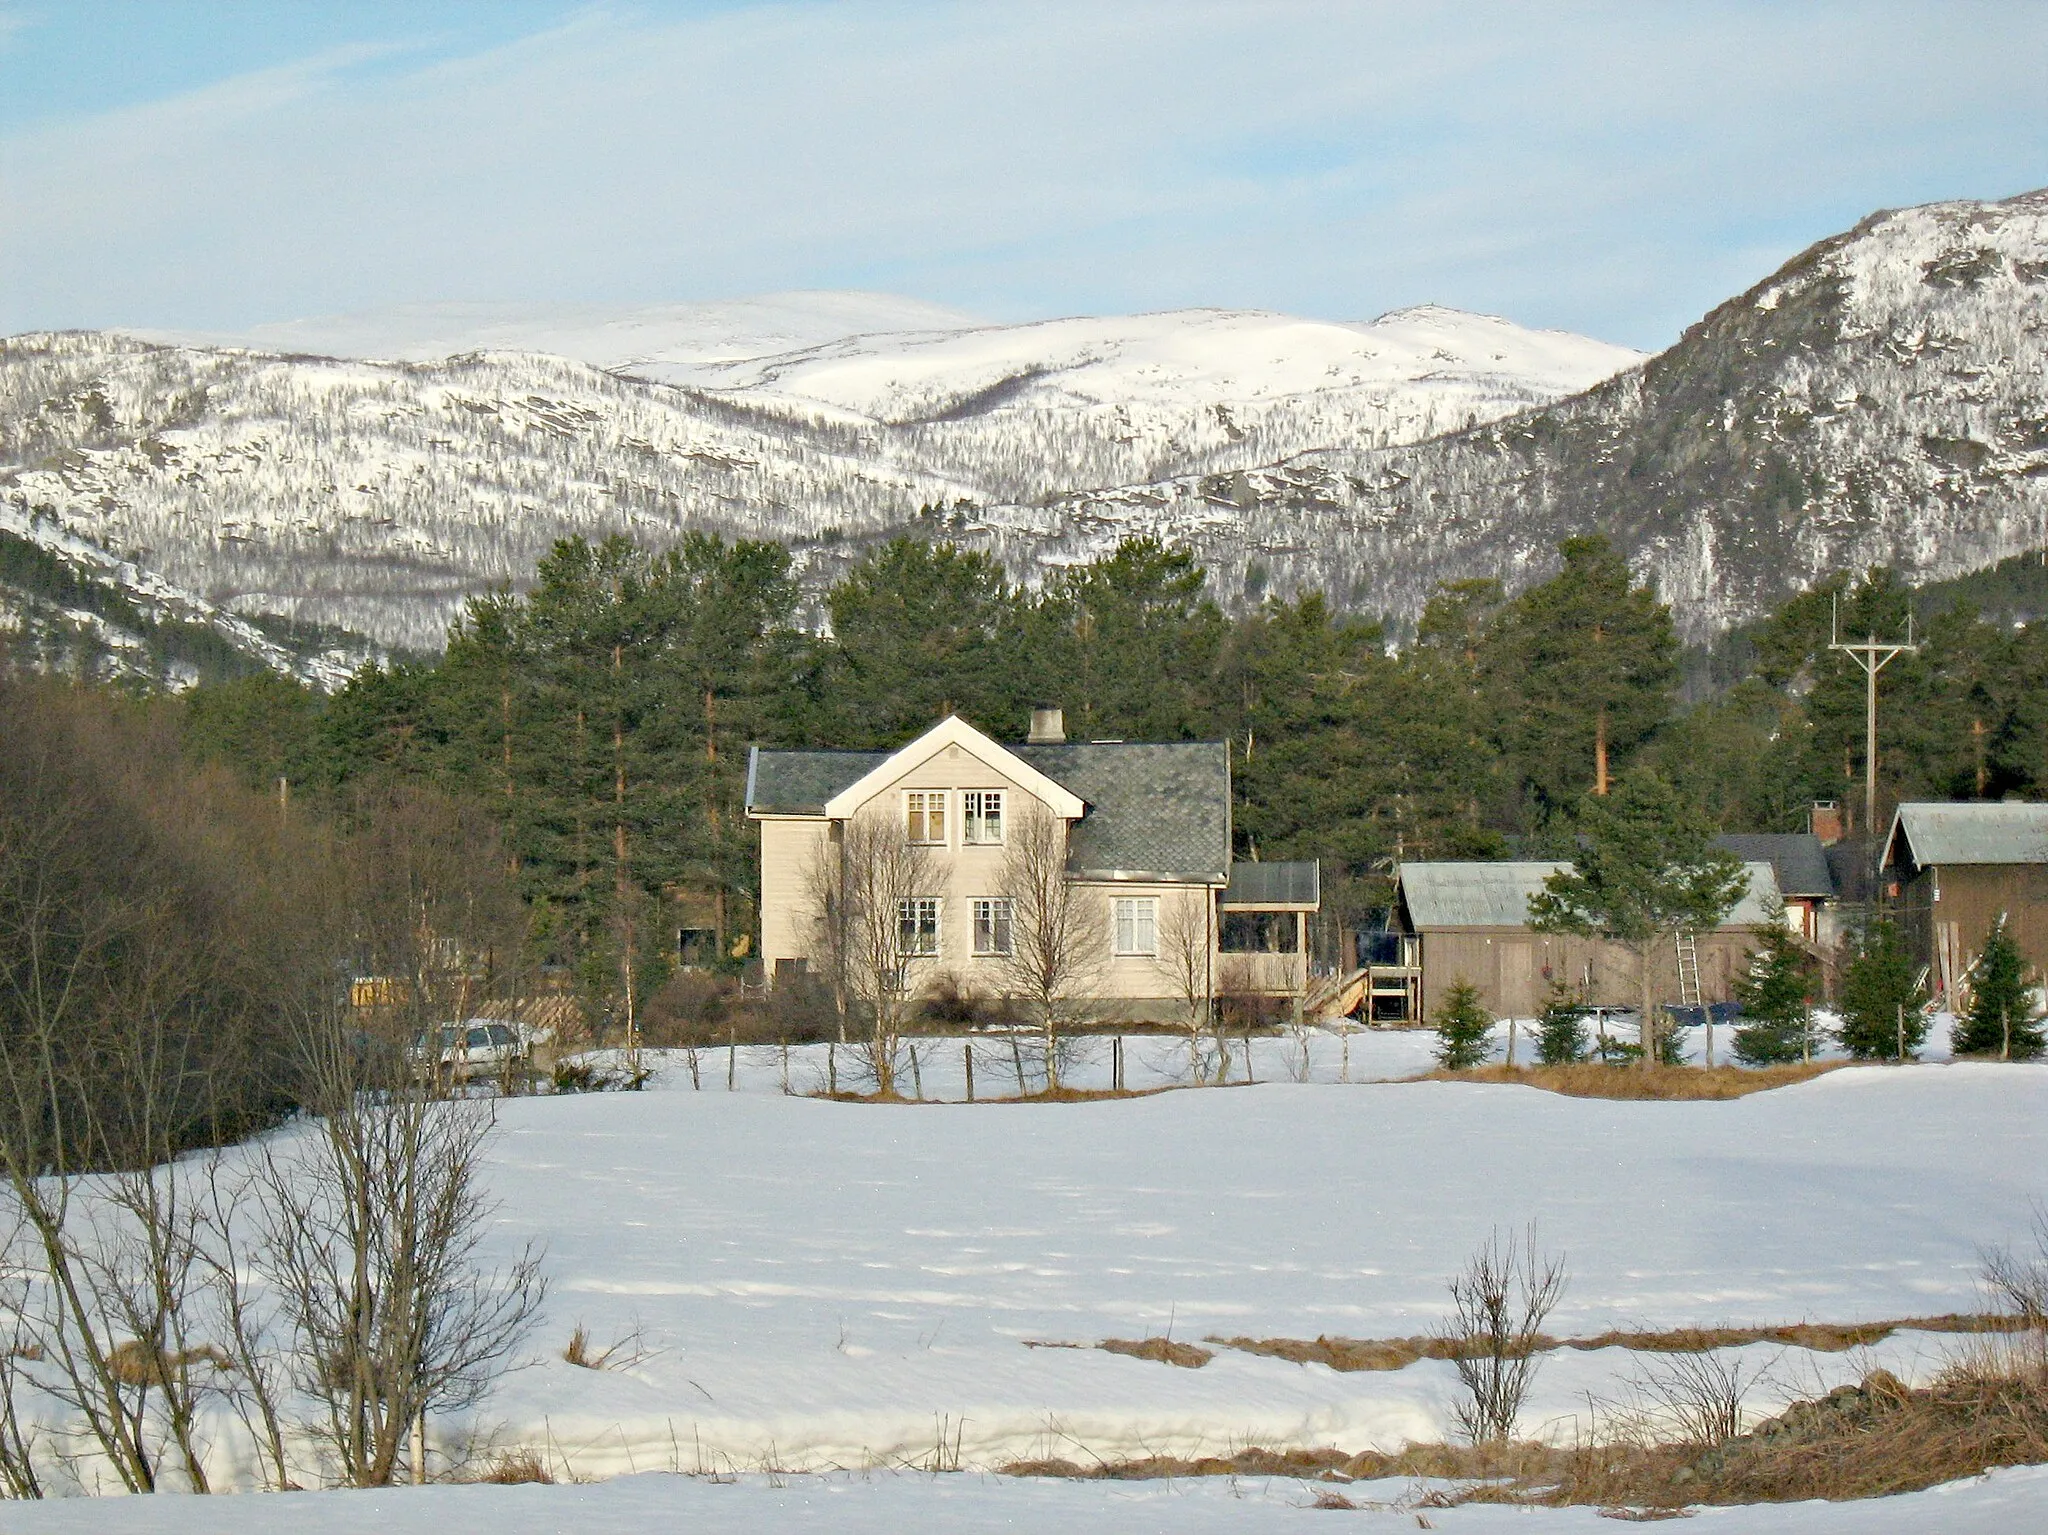 Photo showing: Hovet is a village in Hol Kommune, and is located at the border of national park Hallingskarvet. It belongs to the traditional district of Hallingdal, or Halling Valley. The Hallingdal River, Hallingdalselva,  The river streams also through Hovet, and is named there Storåne. The river Hallingdalselva is also named the "Big River" or "Storåni".